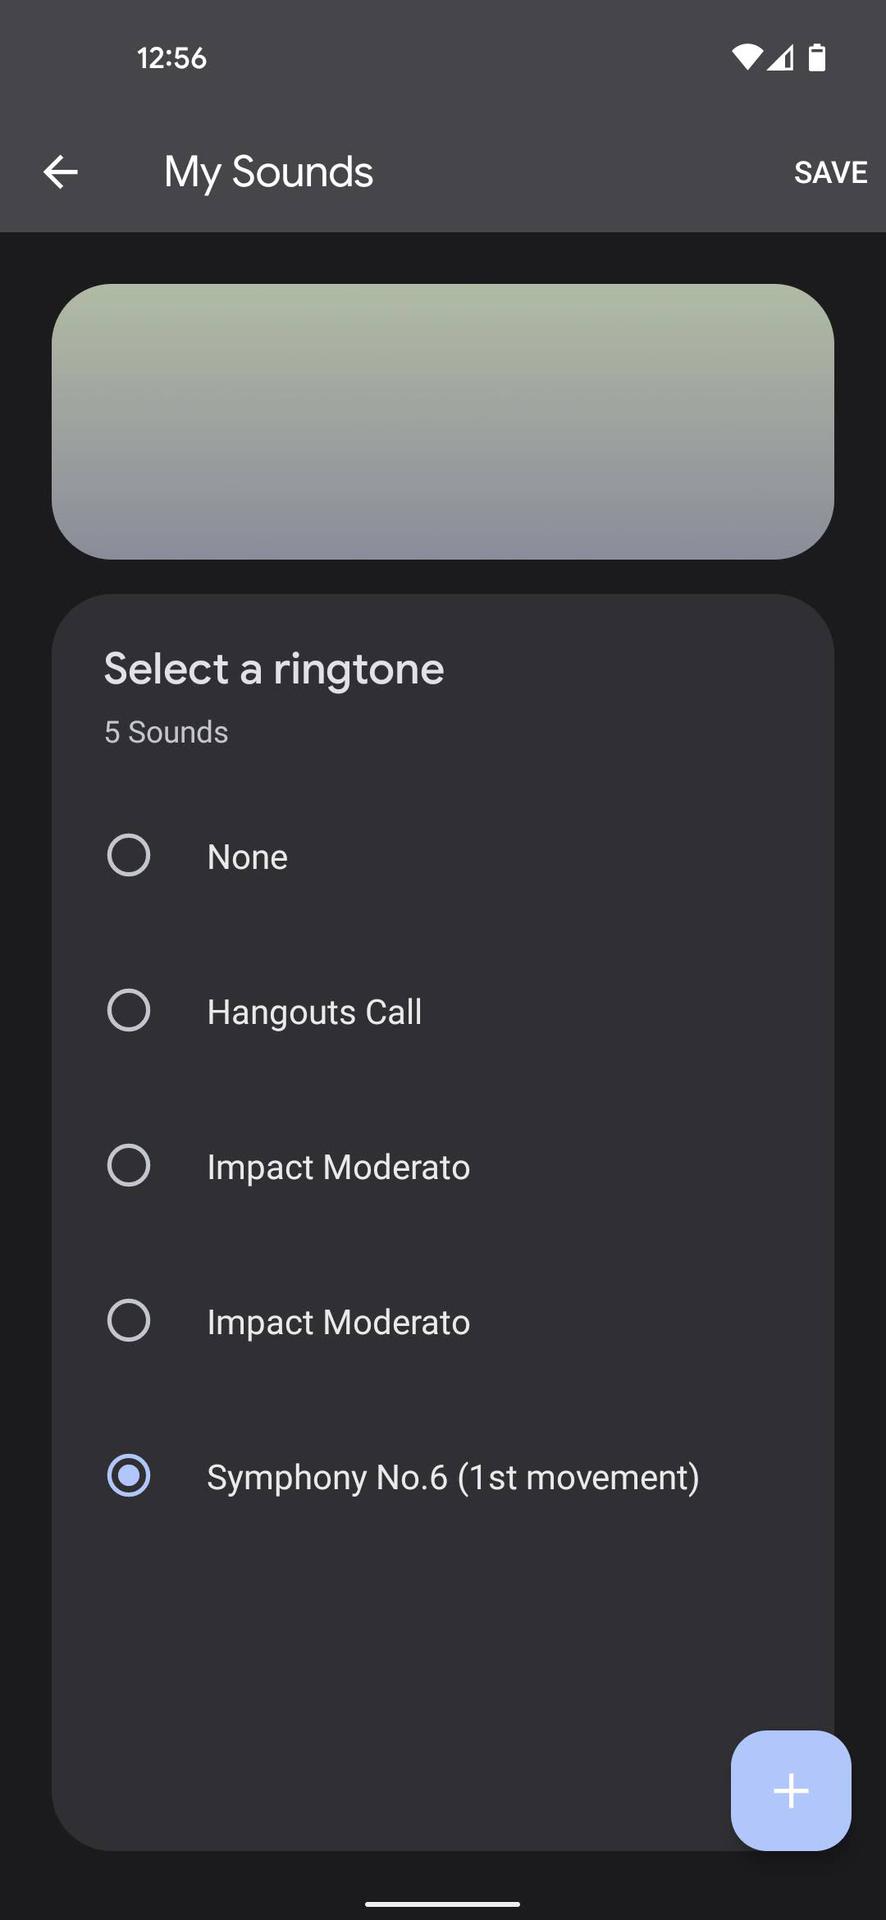 How to set a ringtone on Android 6